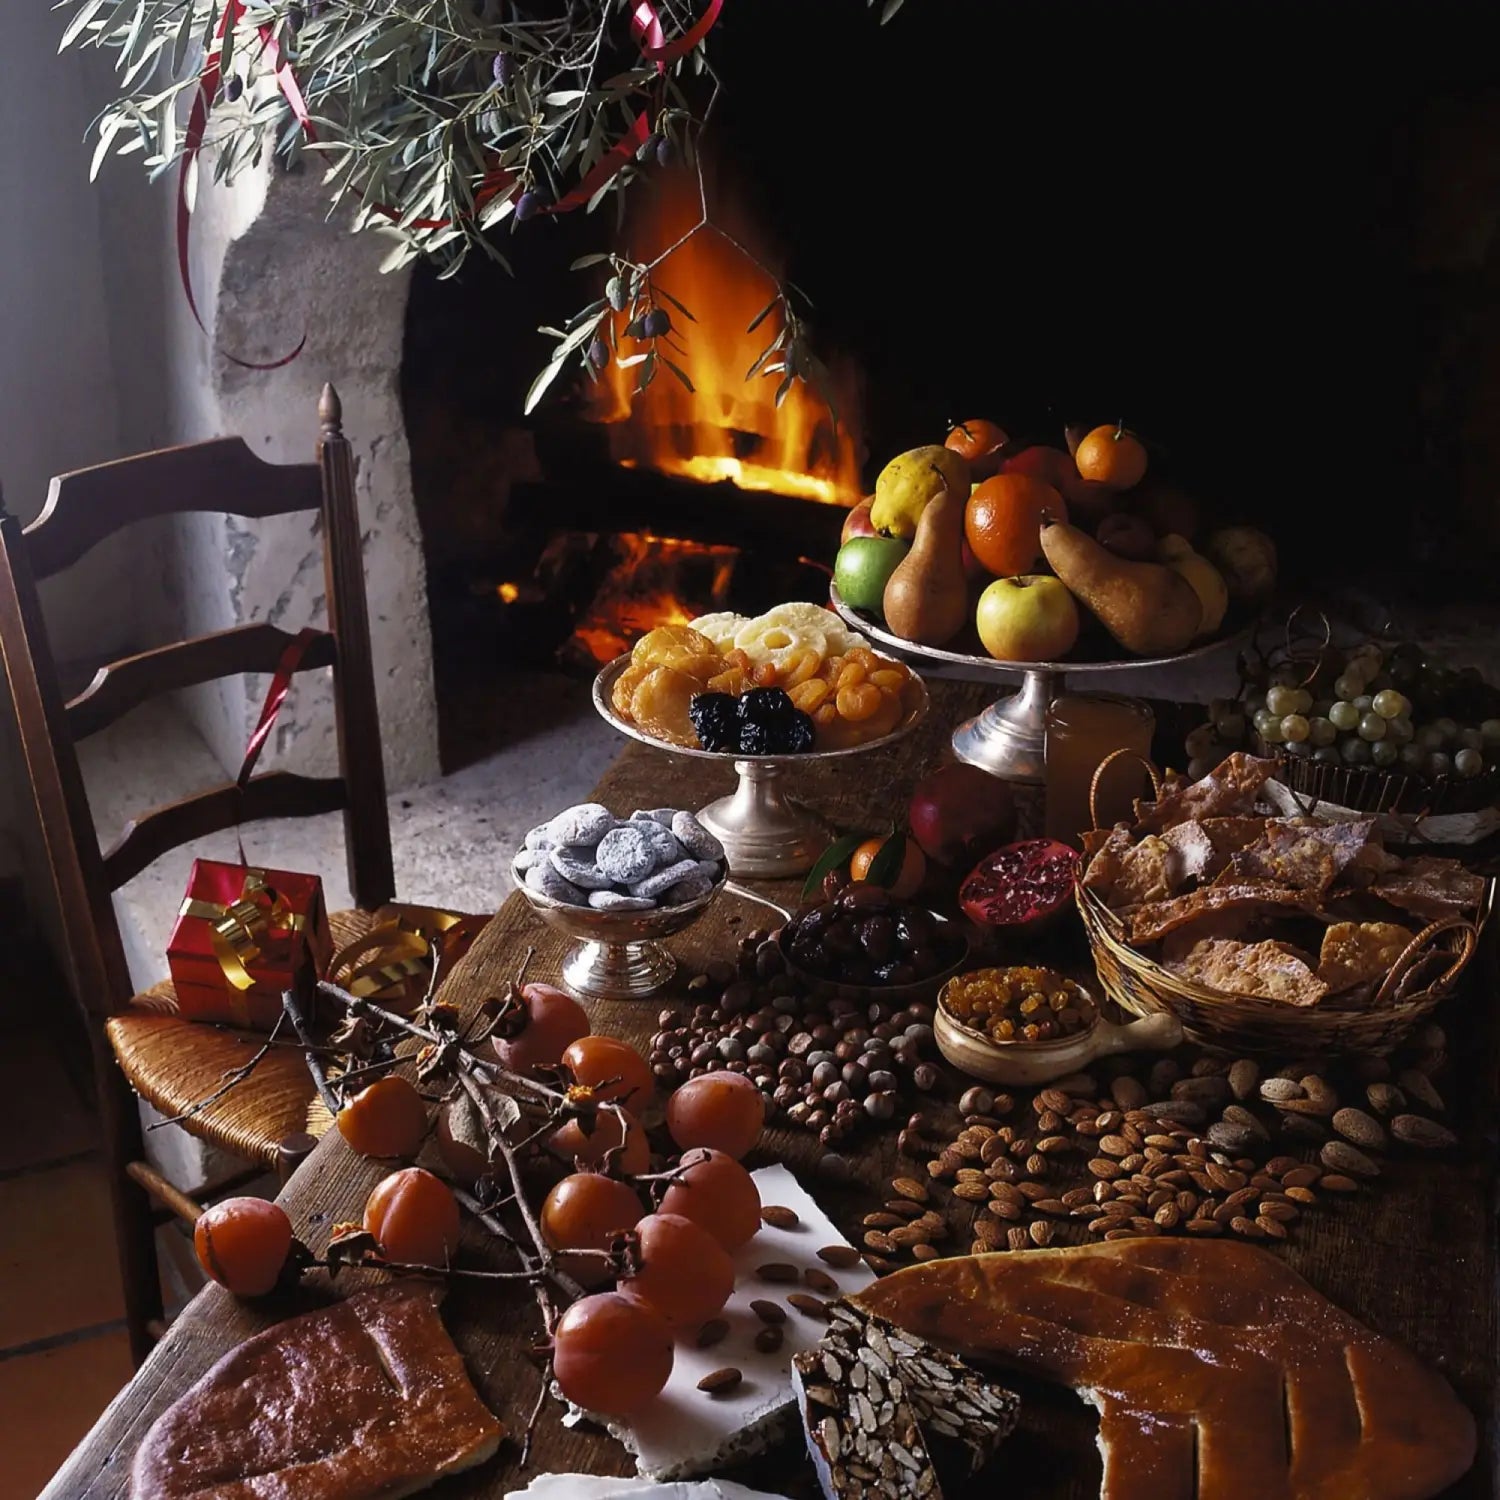 The Thirteen Desserts - A Mainstay of Christmas in Provence